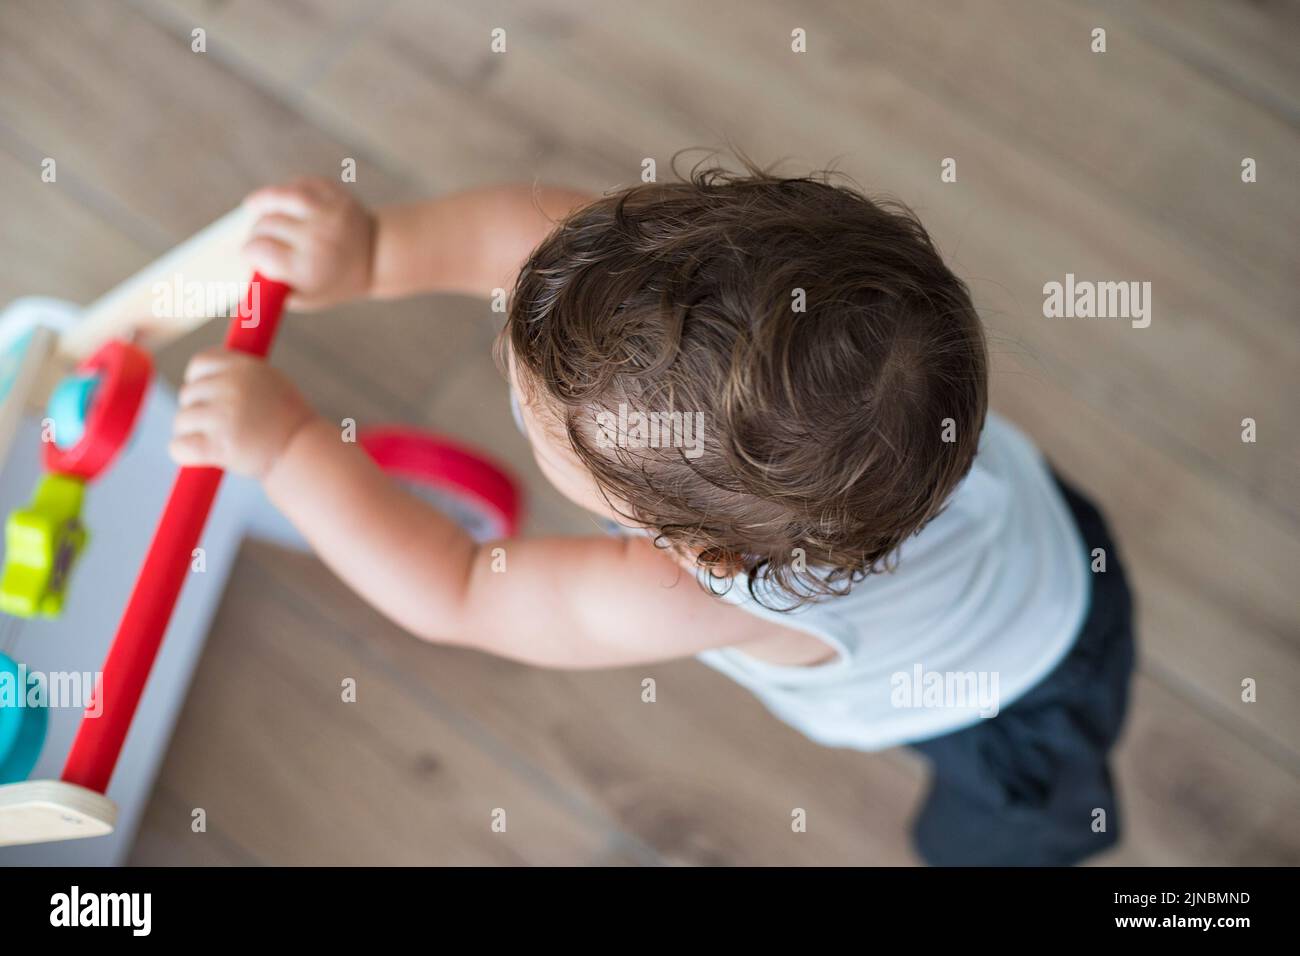 Baby boy, caucasian, one year old, playing and learning with walking toy. Top view, indoor. Stock Photo